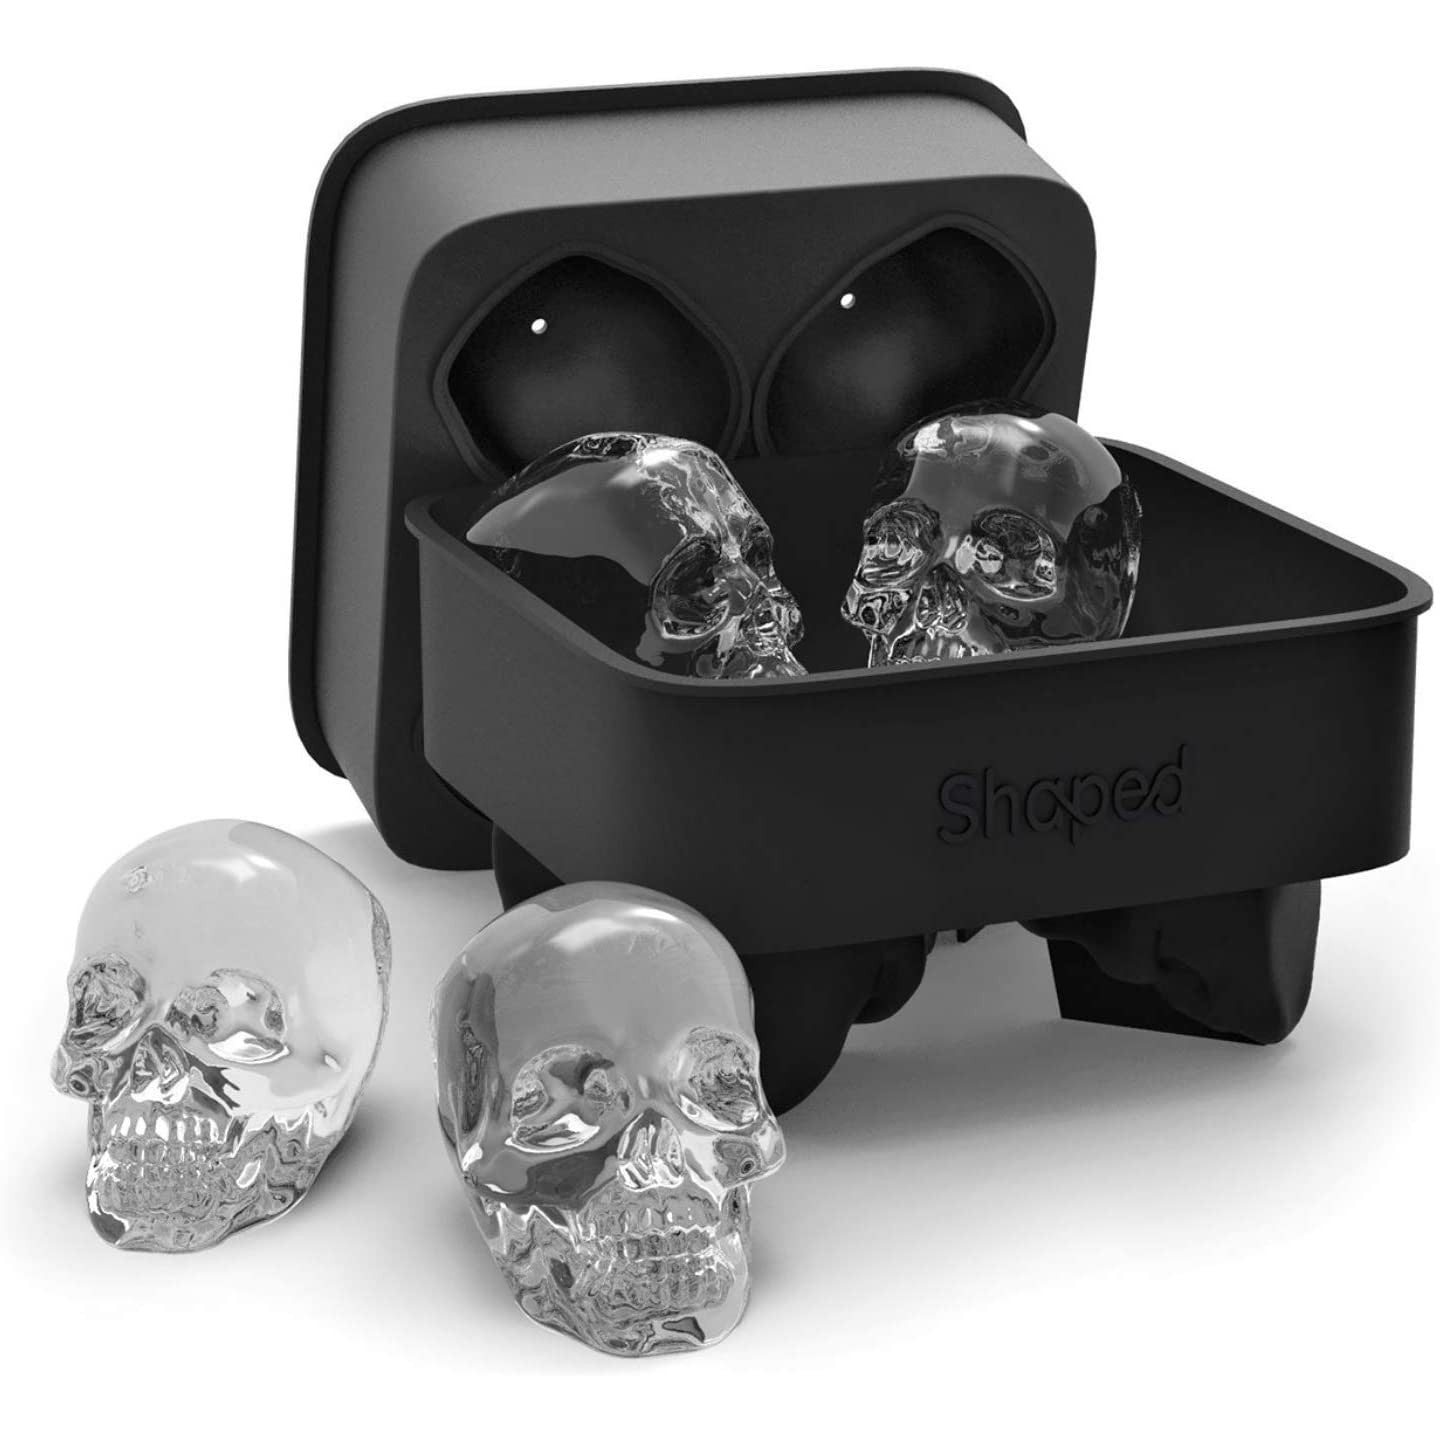 A black silicone ice cube mold which allows you to make 4 large skull shaped ice cubes for your drinks. There are 4 ready-made skull shaped ice cubes as examples.